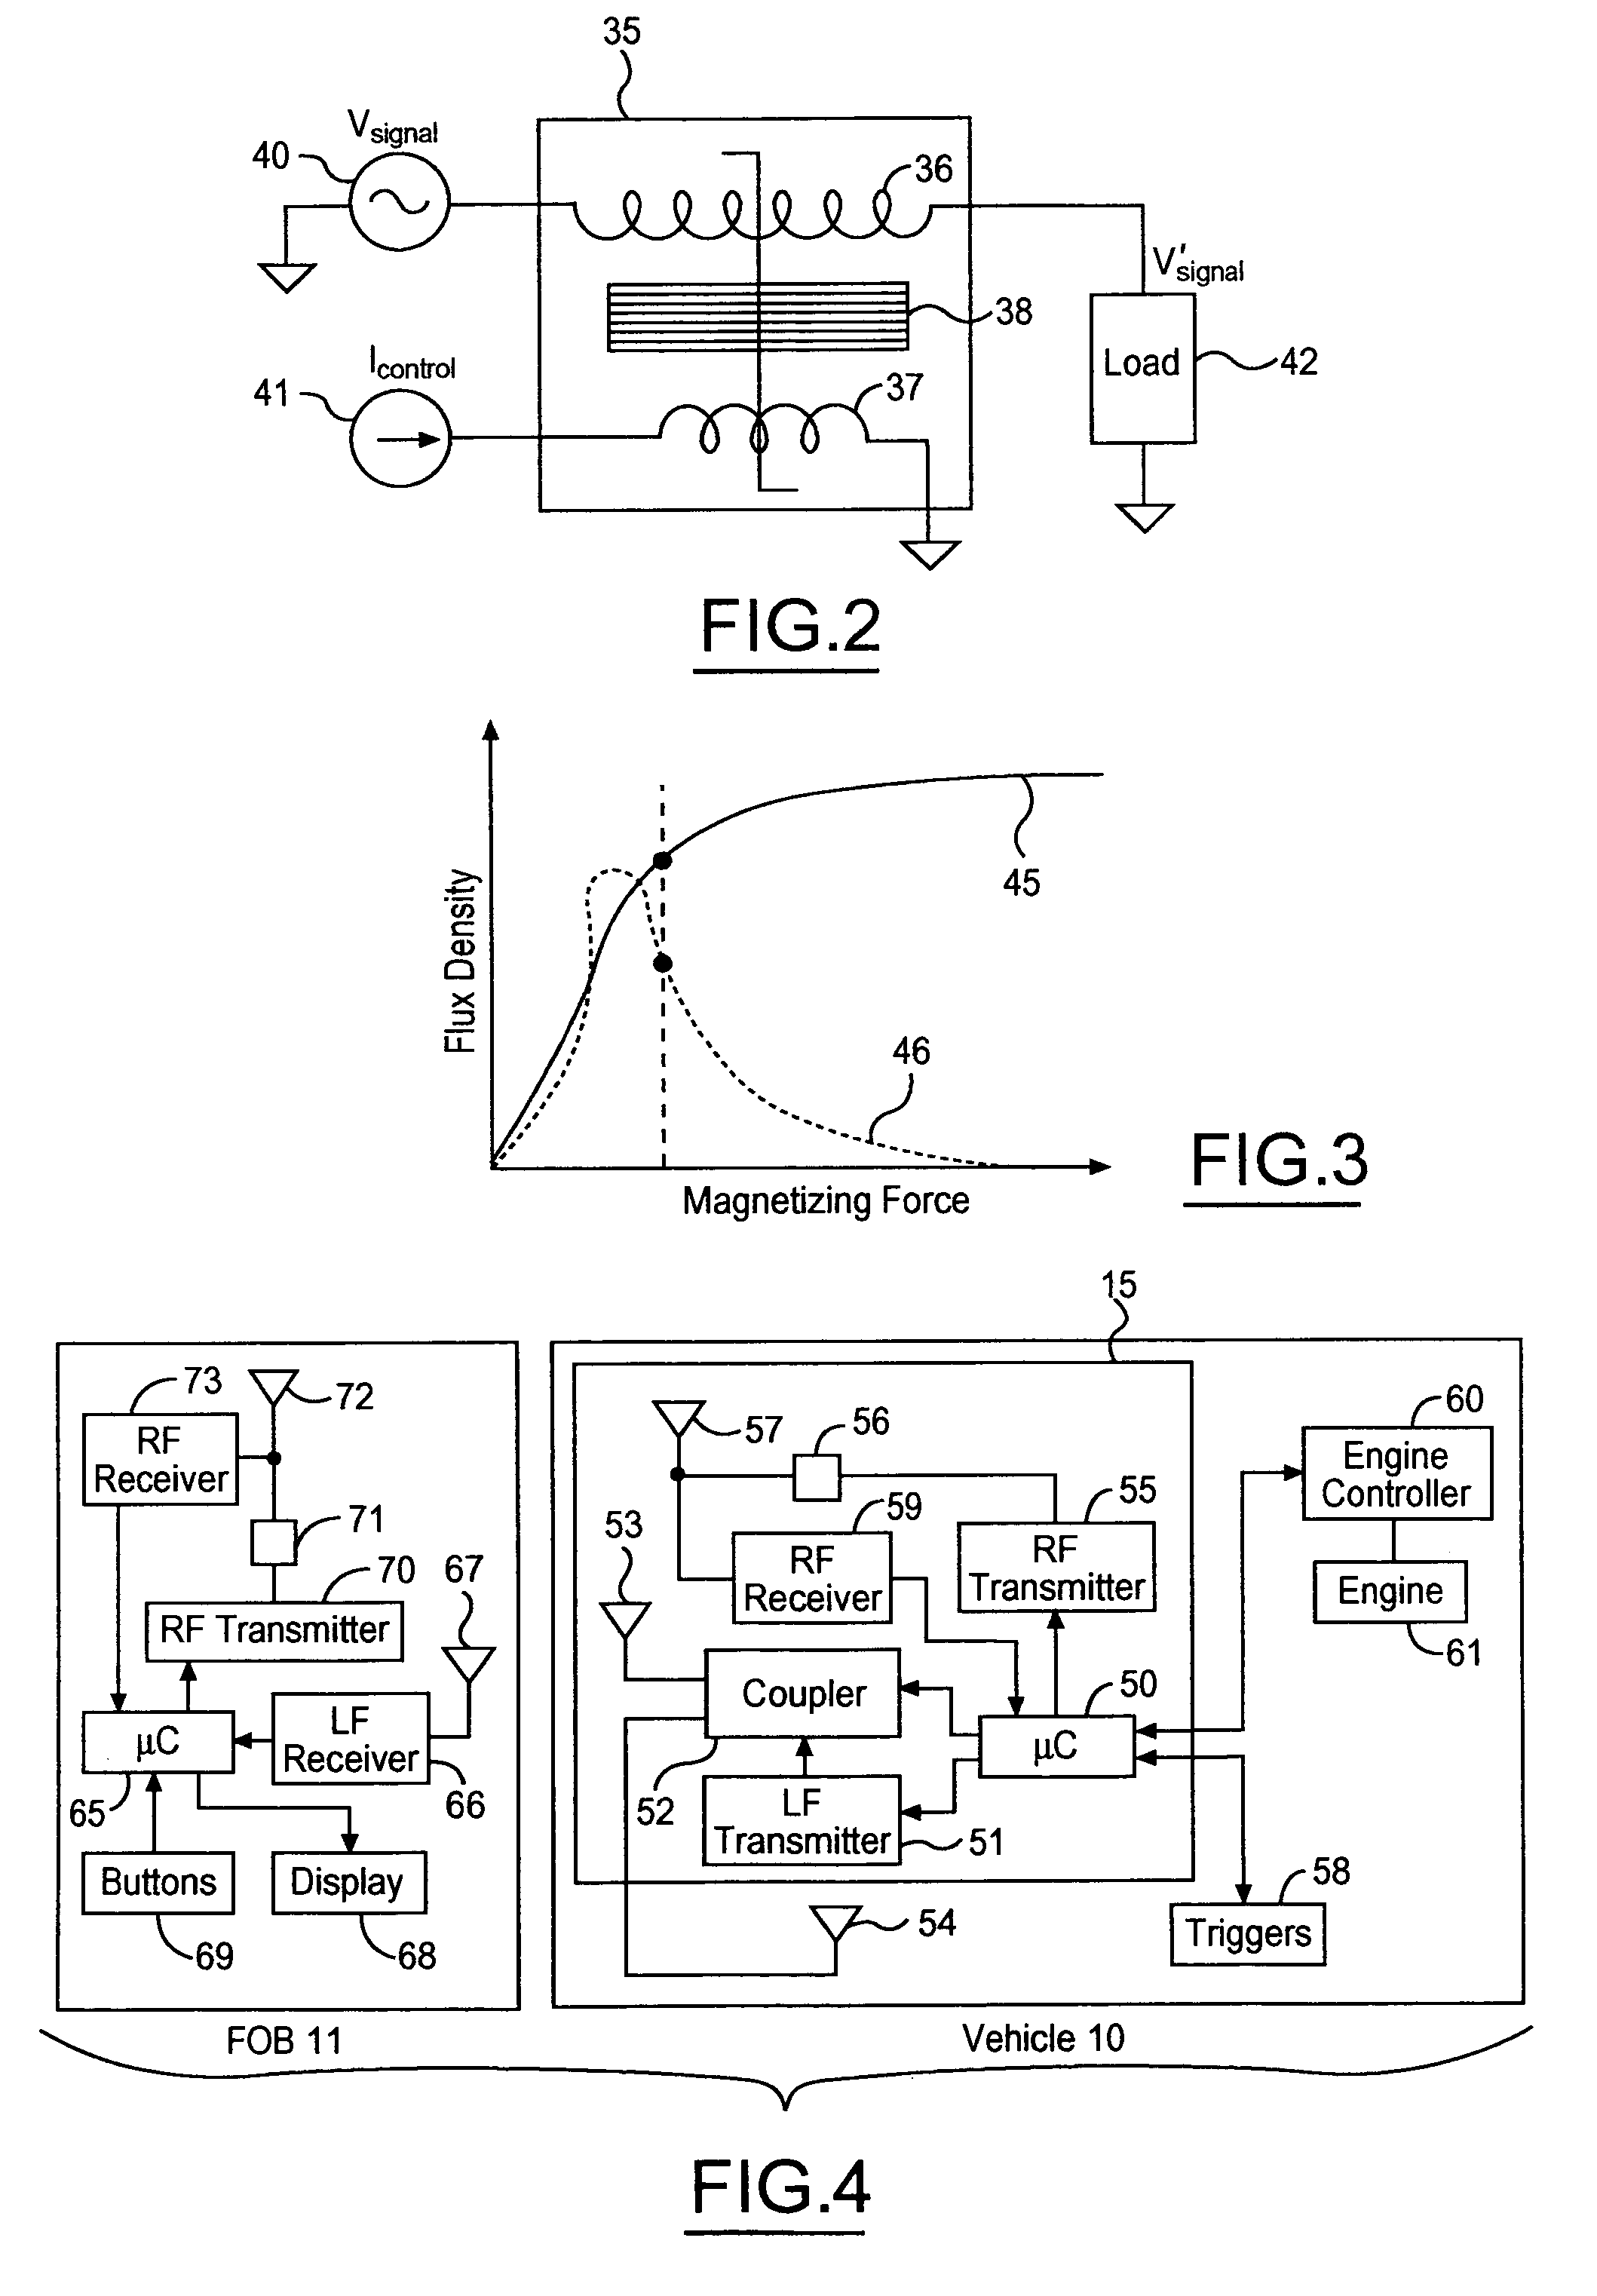 Transmit antenna multiplexing for vehicular passive entry systems